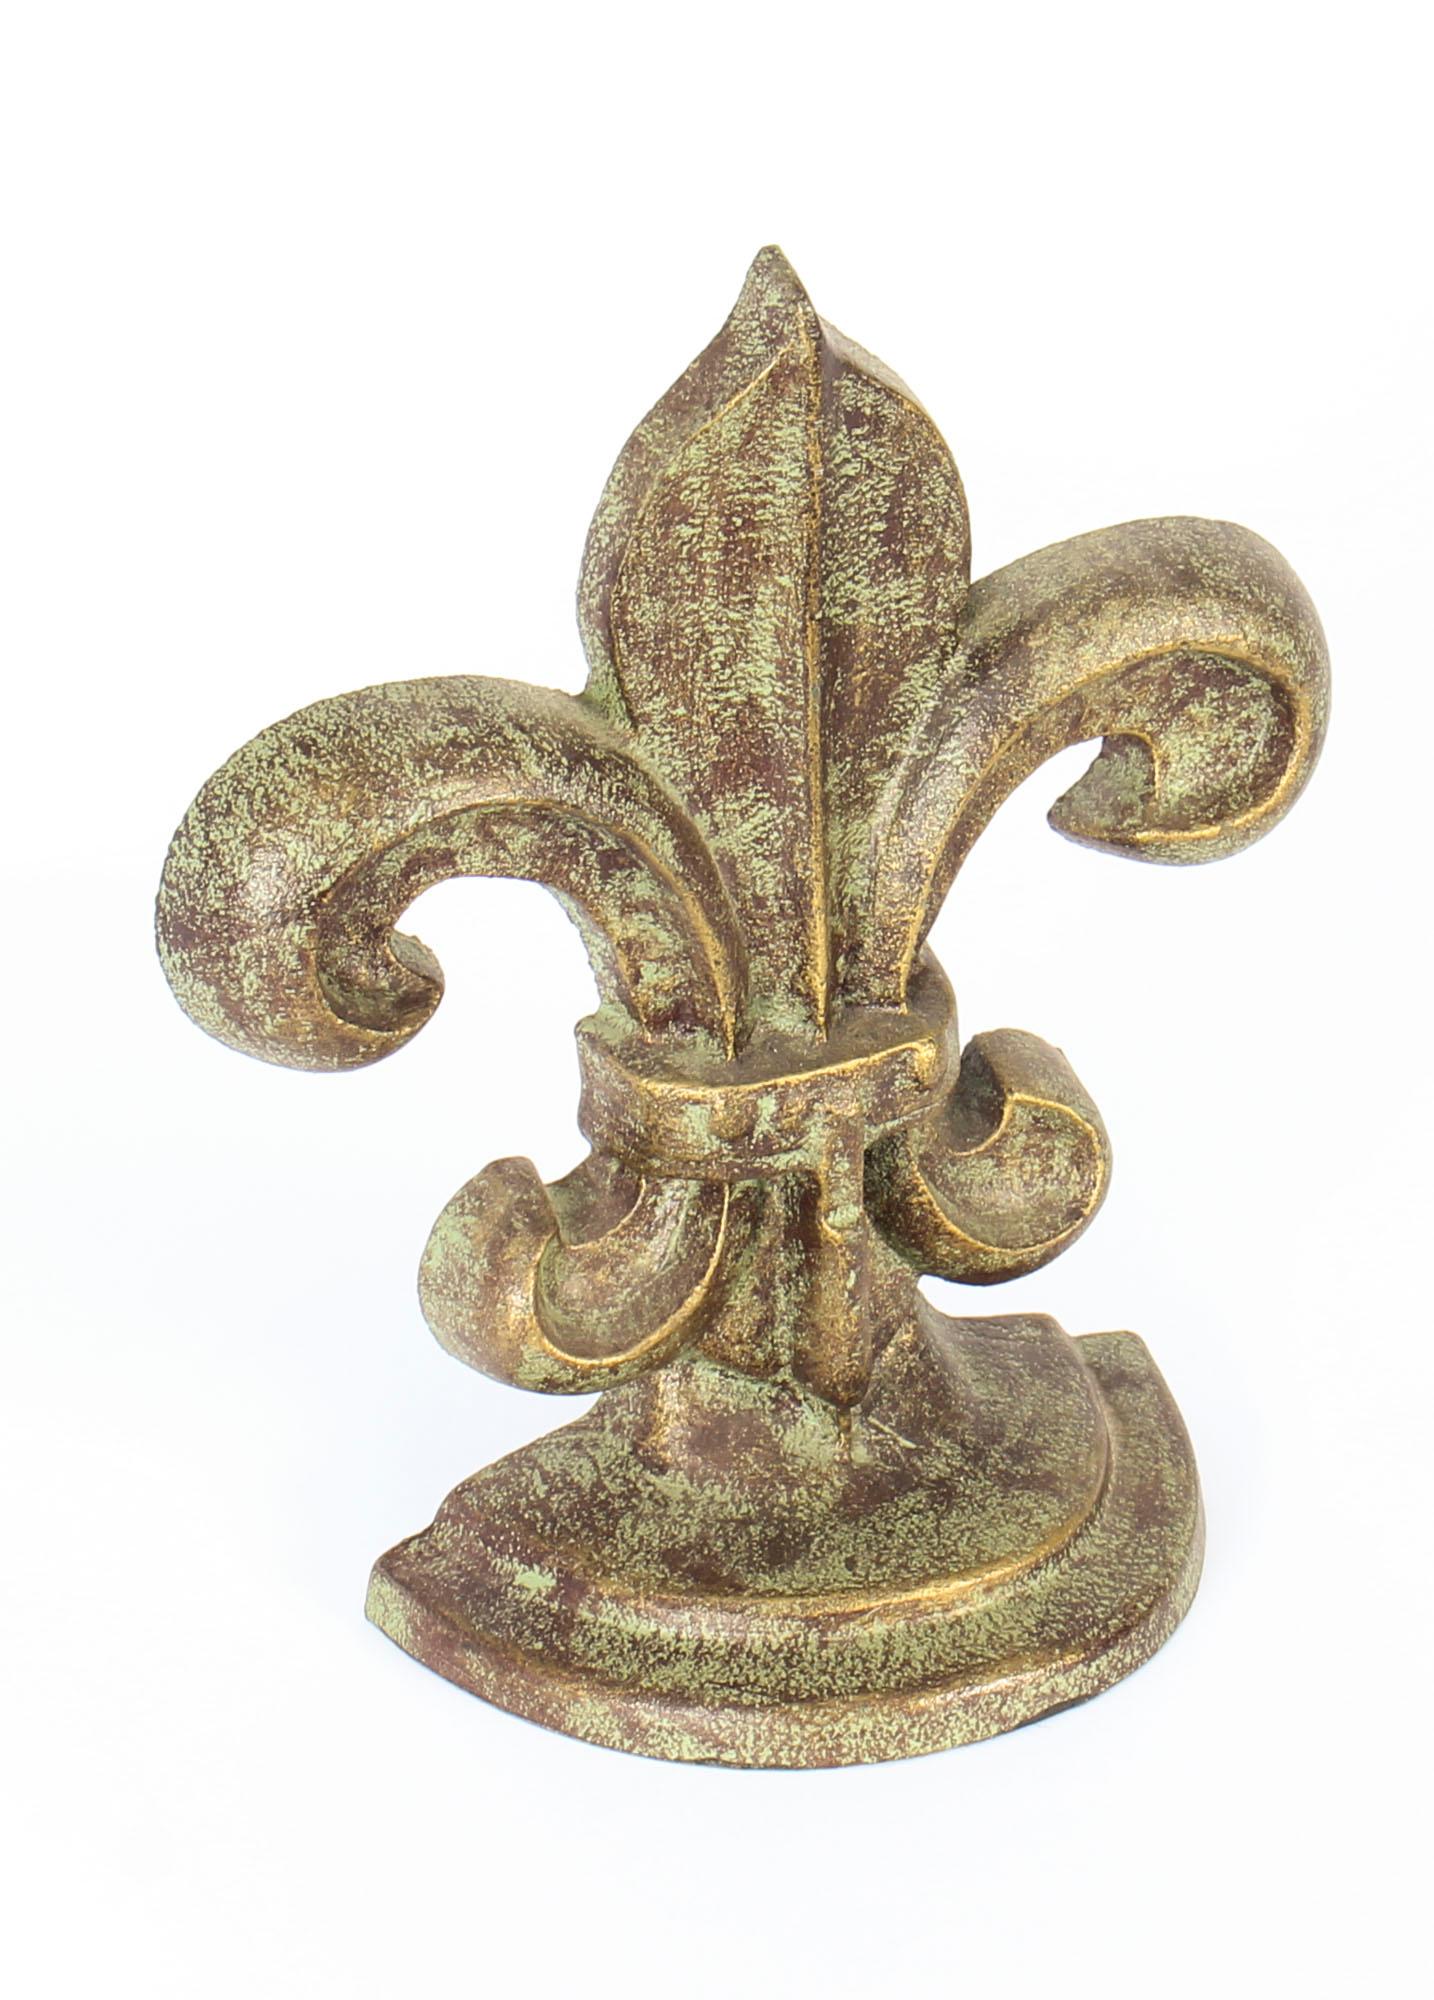 A lovely pair of cast iron Fleur de Lys door stops, mid-20th century in date.

The pair are painted with a textured green, black and gold finish and are supported on semi-circular bases.

Add some regal splendor to your home with these lovely